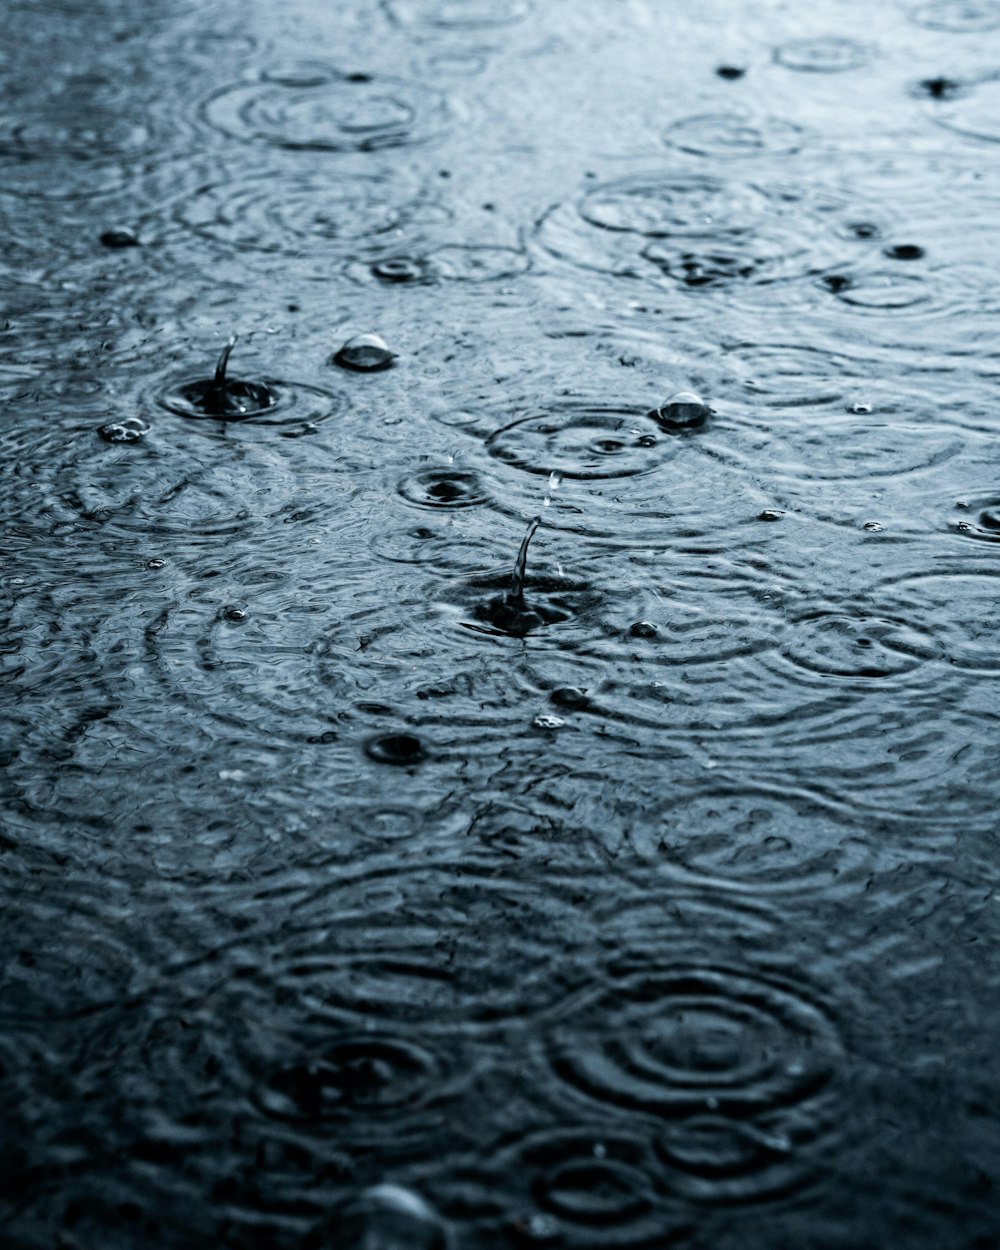 a group of raindrops on a wet surface